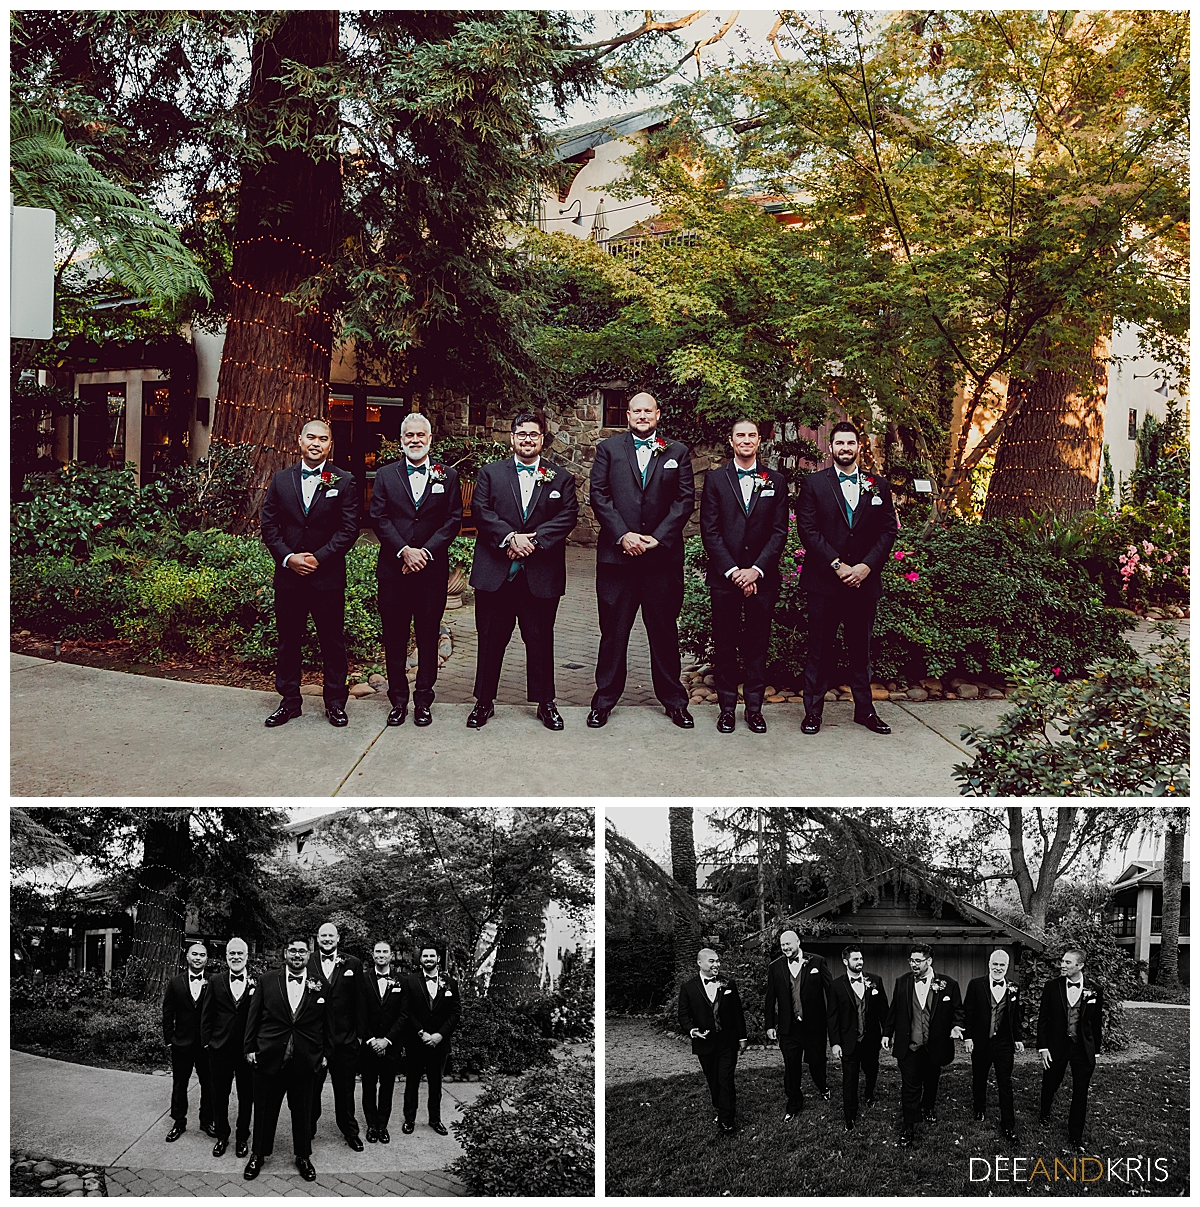 Three images: Top color image of groom standing in a line with groomsmen in wedding party pose.
Bottom left black-and-white image of groom standing in front of groomsmen with groomsmen behind him in V formation. Bottom right black-and-white image of groom and groomsmen laughing as they walk towards camera.